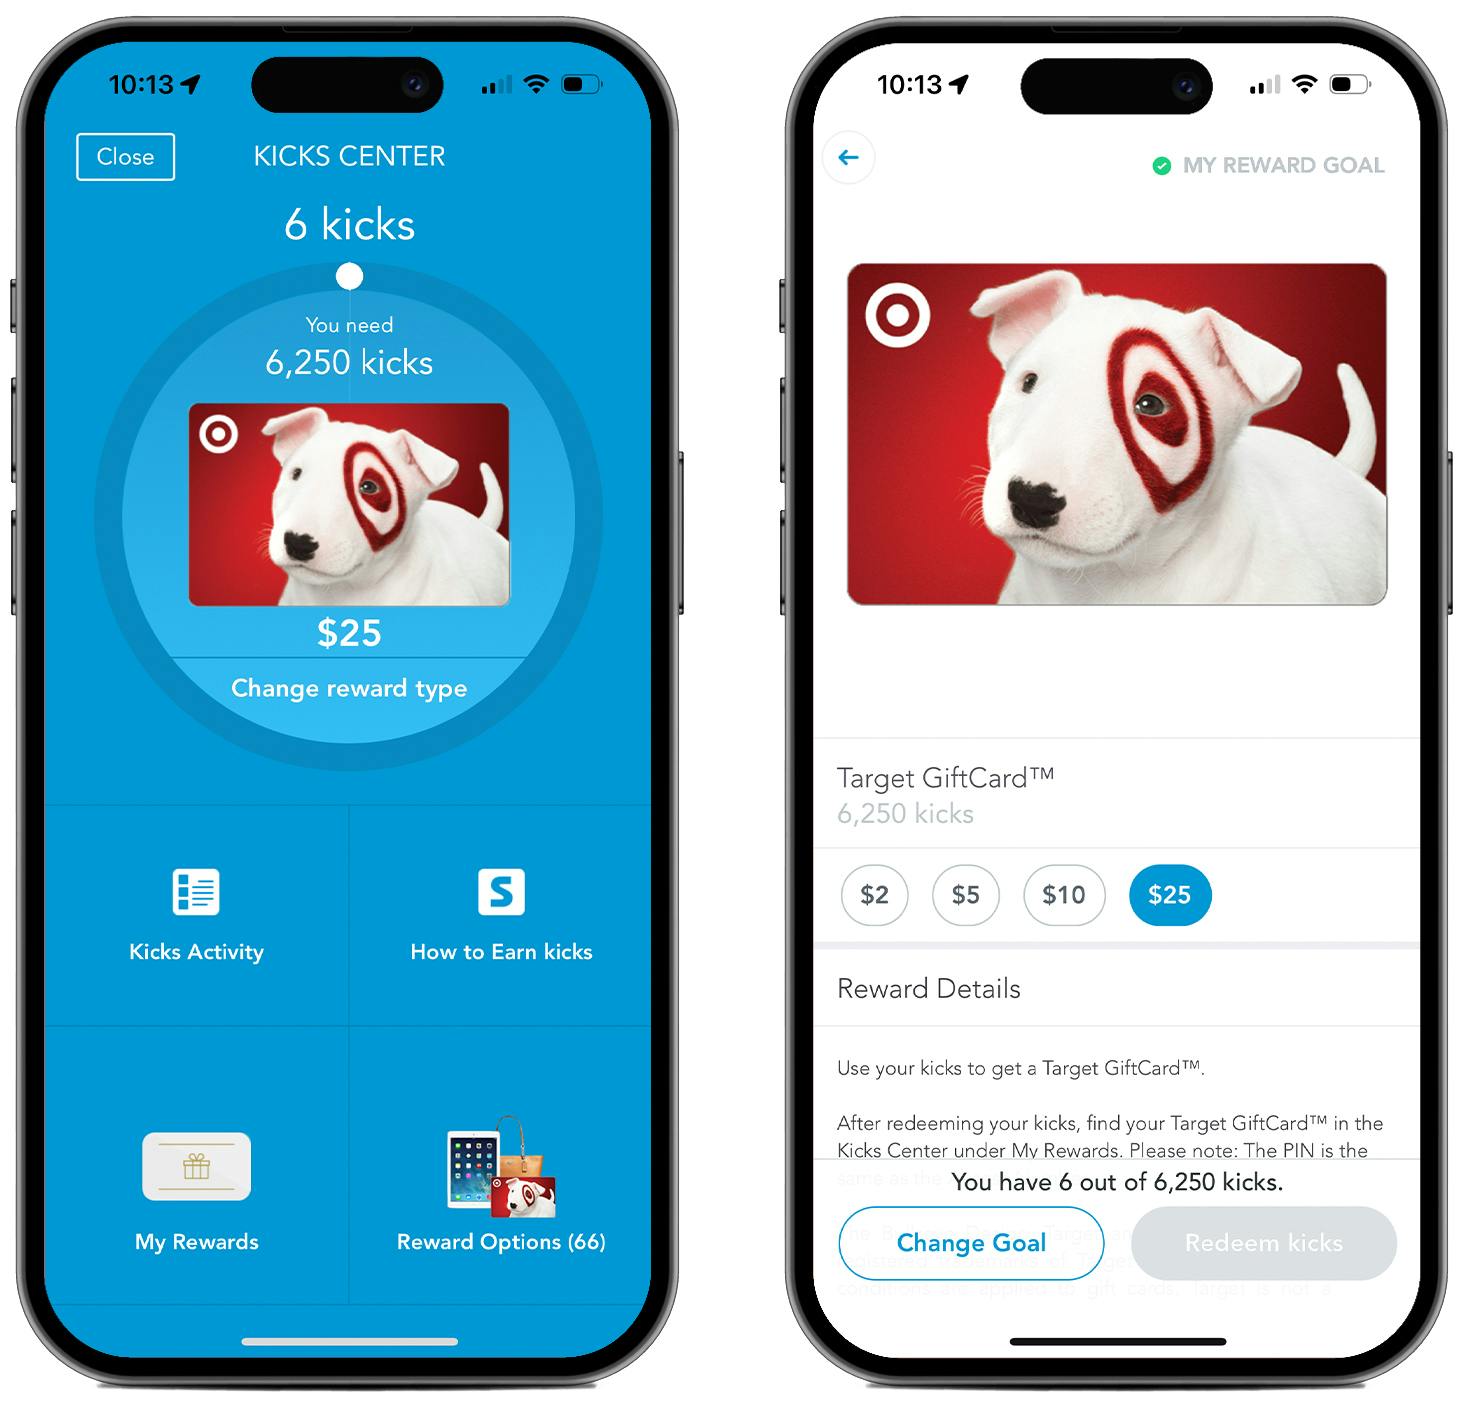 Two phones, one showing the Shopkick rewards main page and the other showing the different levels of gift card rewards for a Target gift card